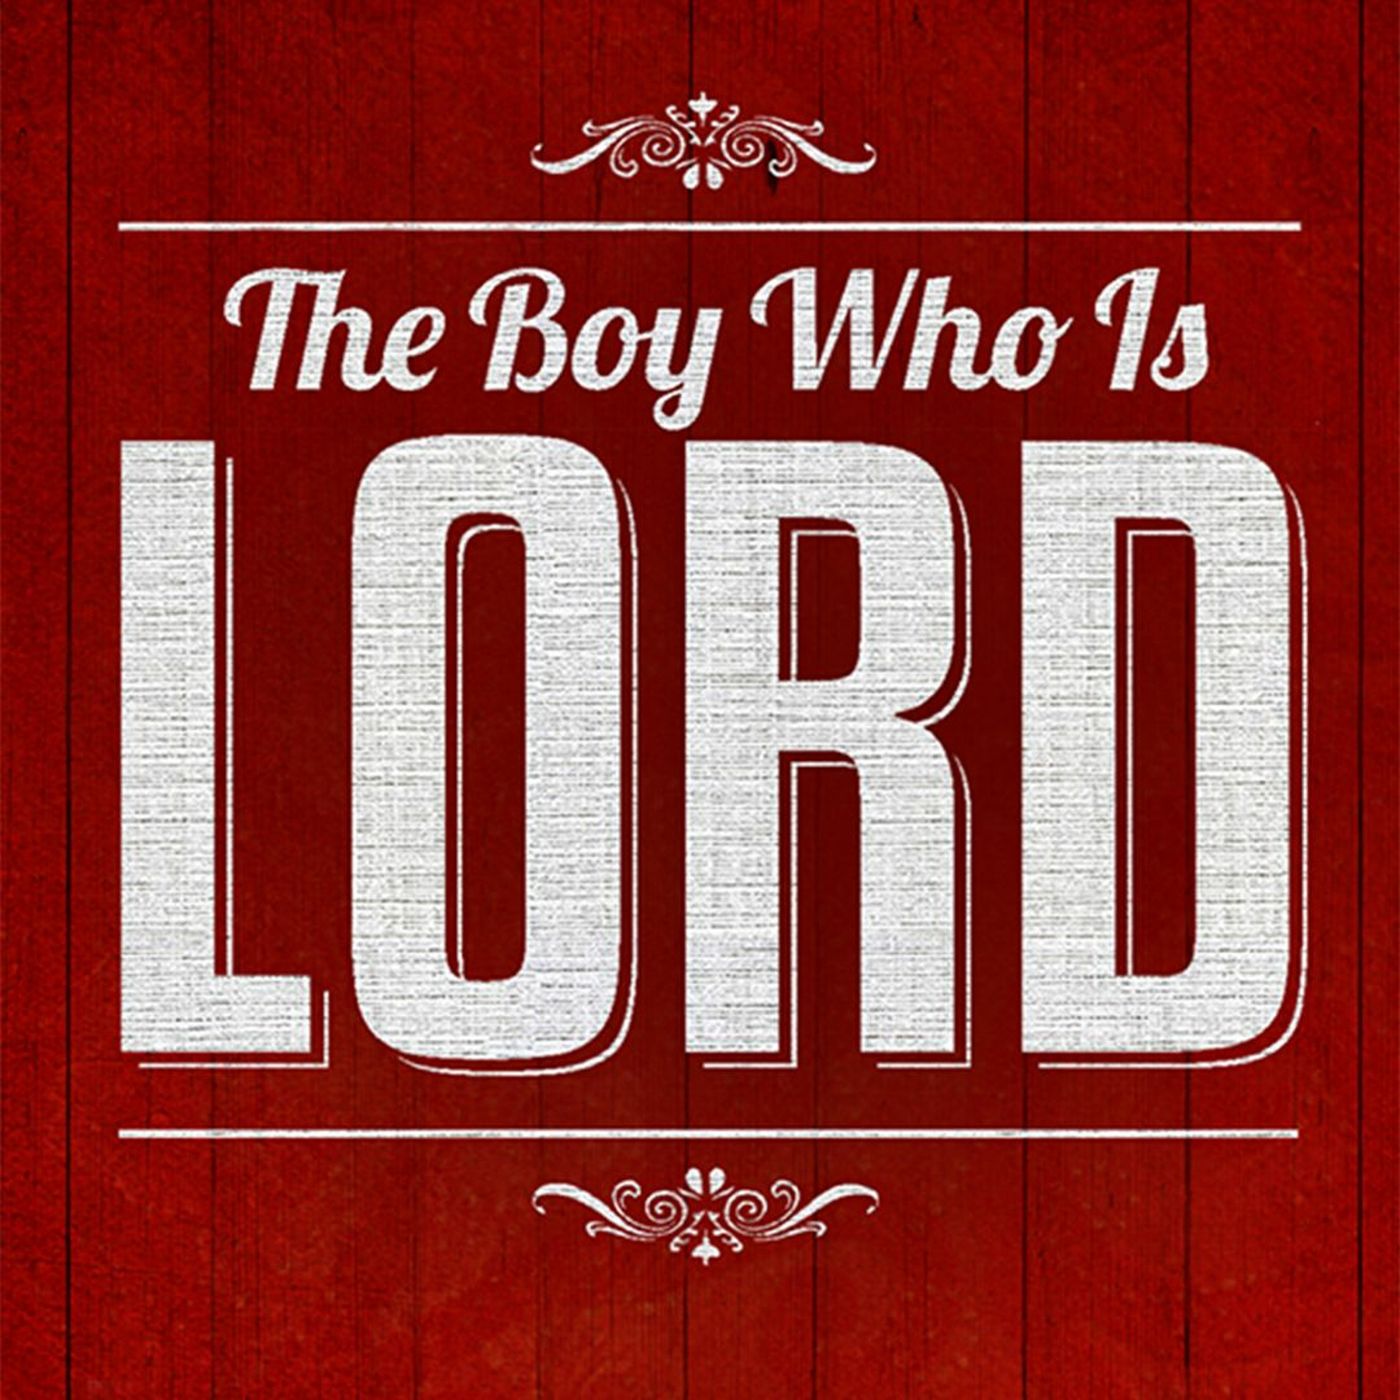 The Boy Who Is Lord #1 - The Truth About Jesus